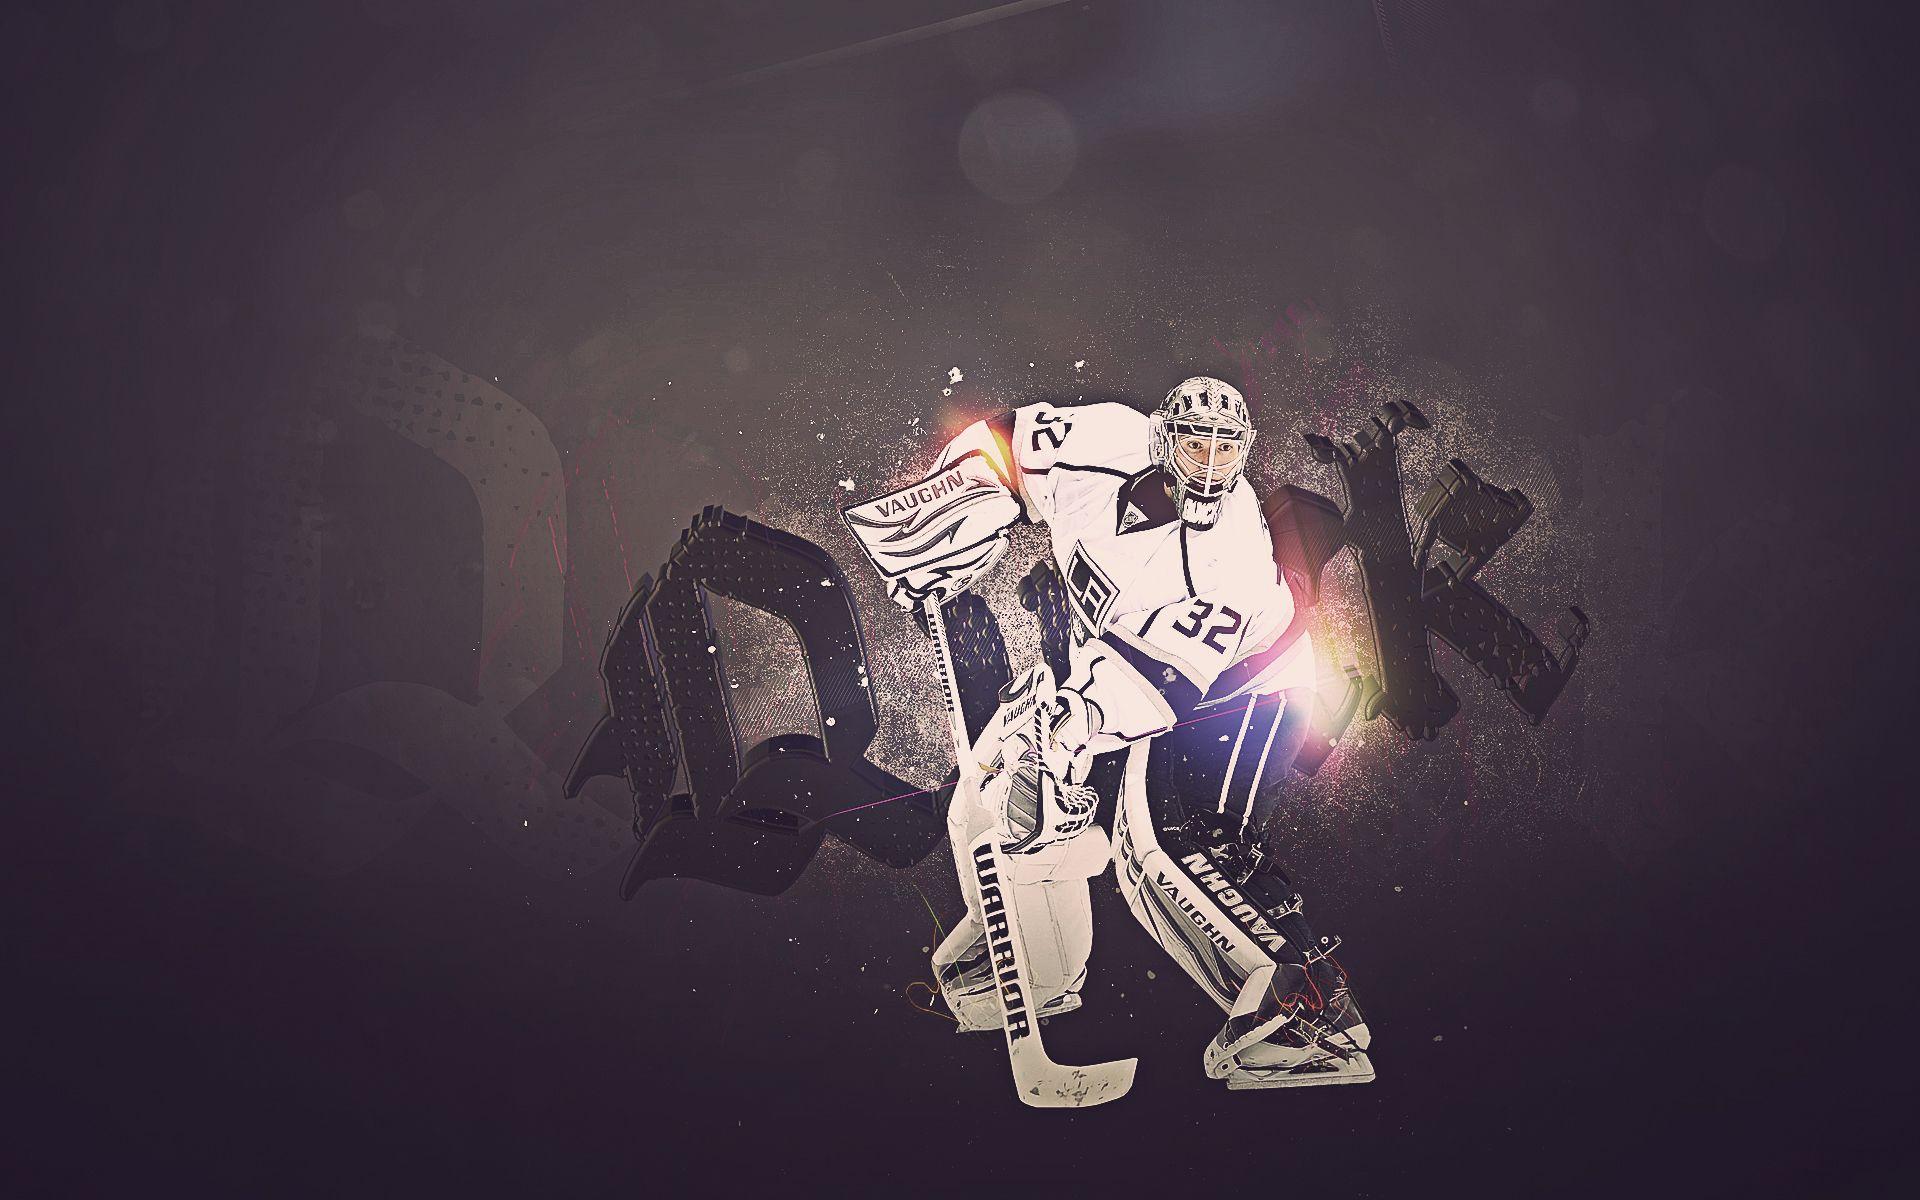 Jonathan Quick wallpaper and image, picture, photo